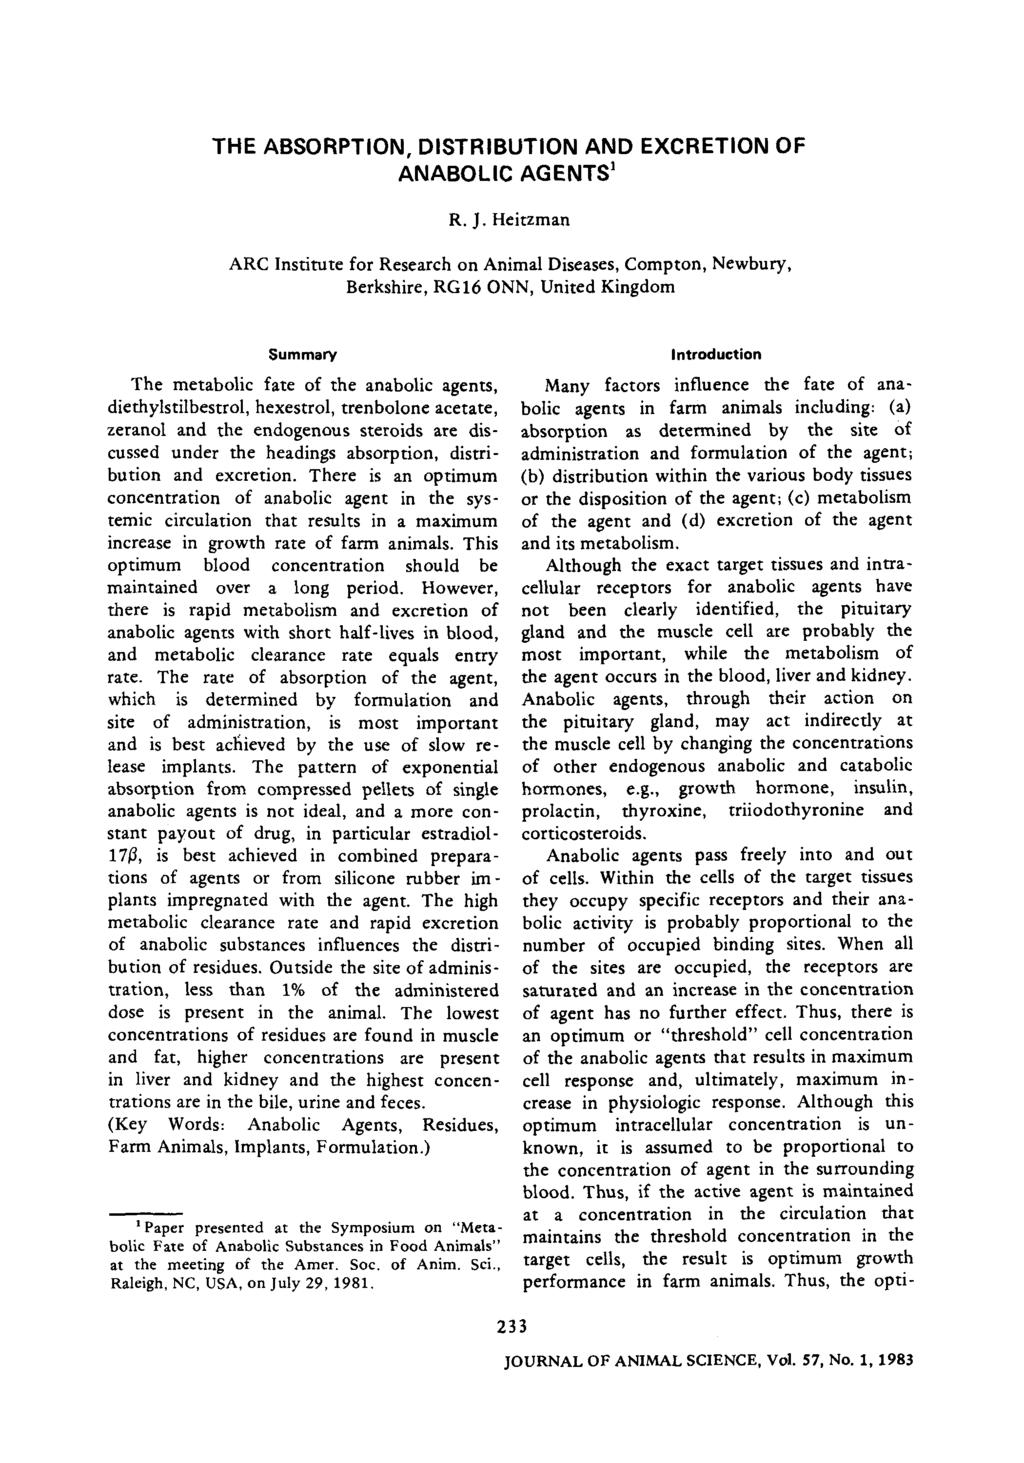 THE ABSORPTION, DISTRIBUTION AND EXCRETION OF ANABOLIC AGENTS 1 R. J.